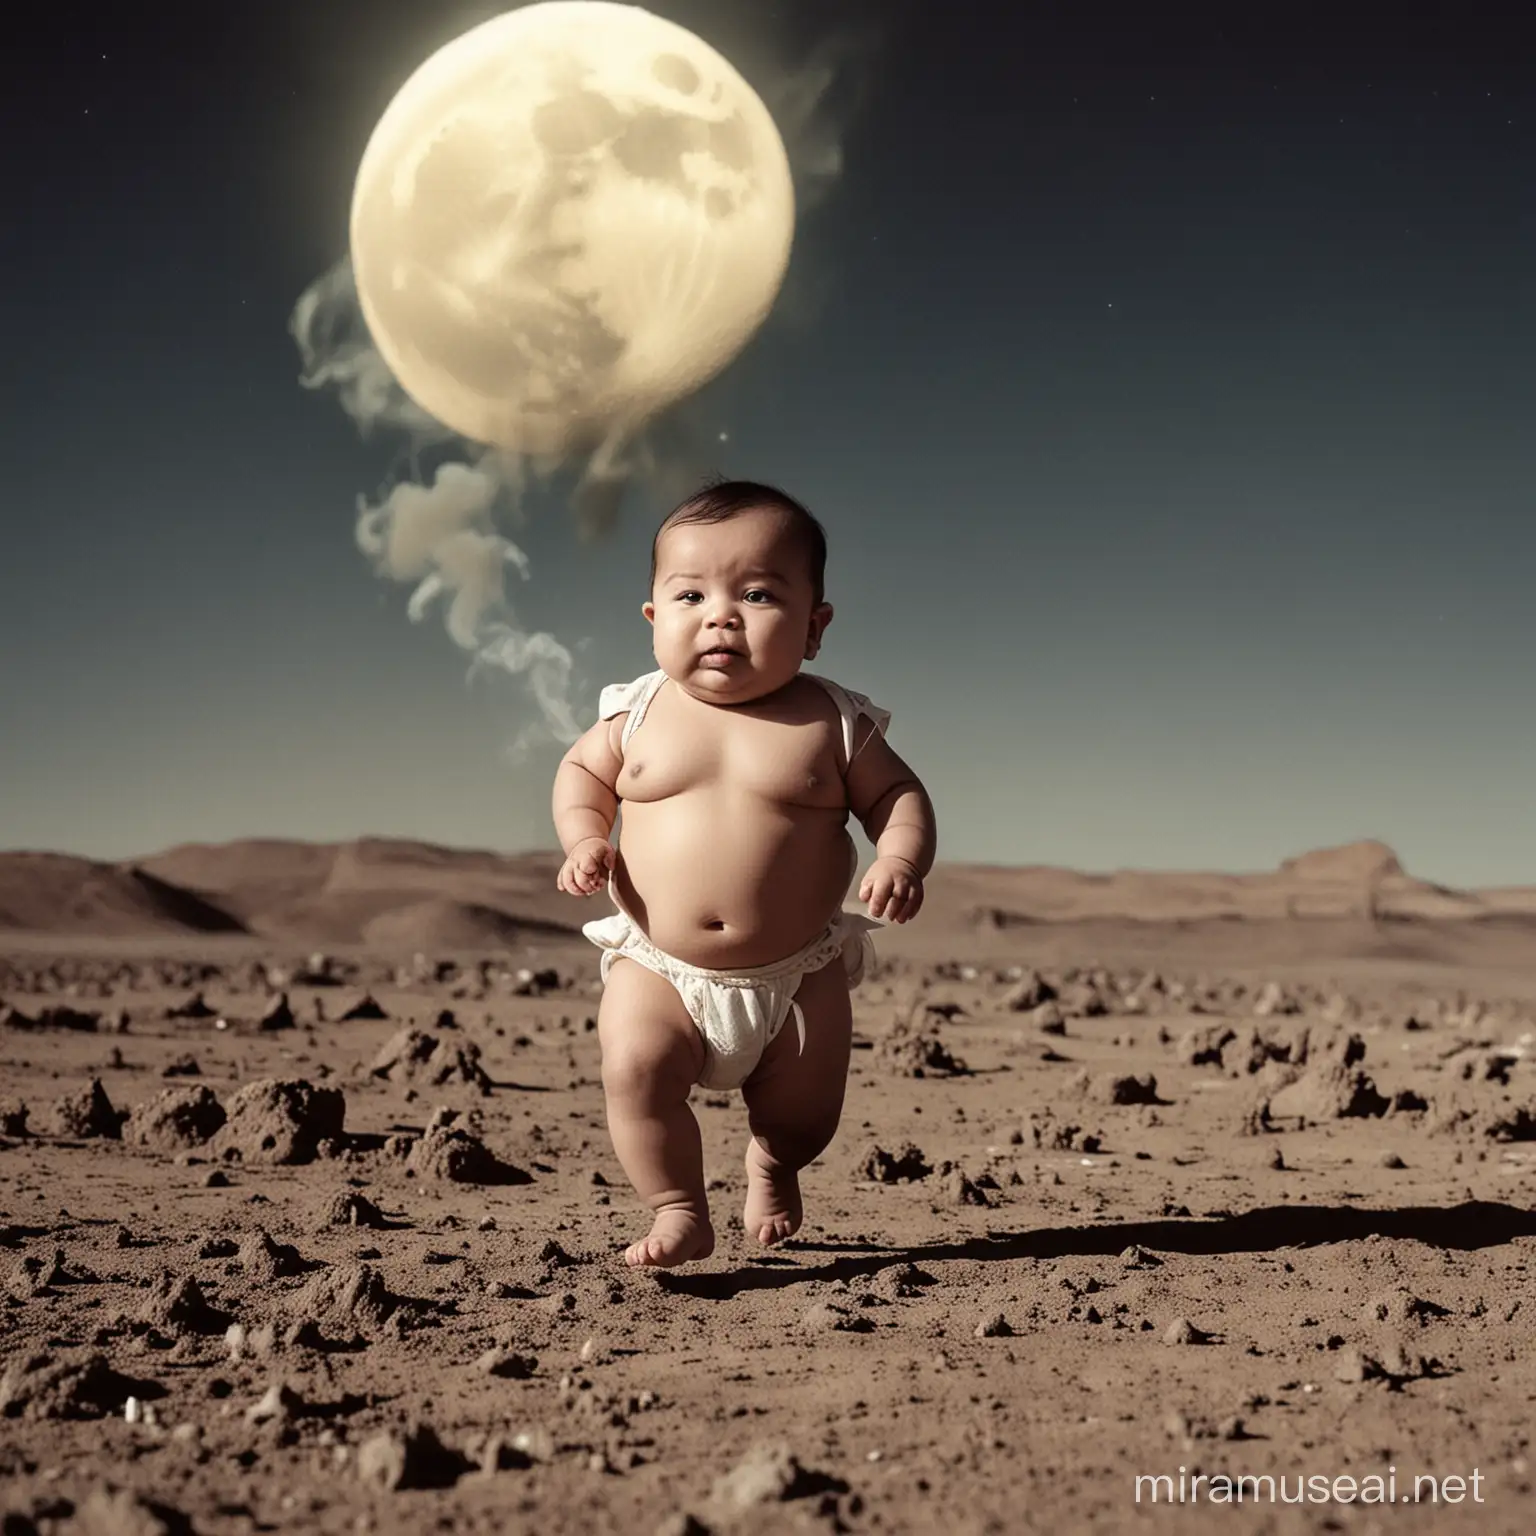 fat India baby smoking and running on moon
